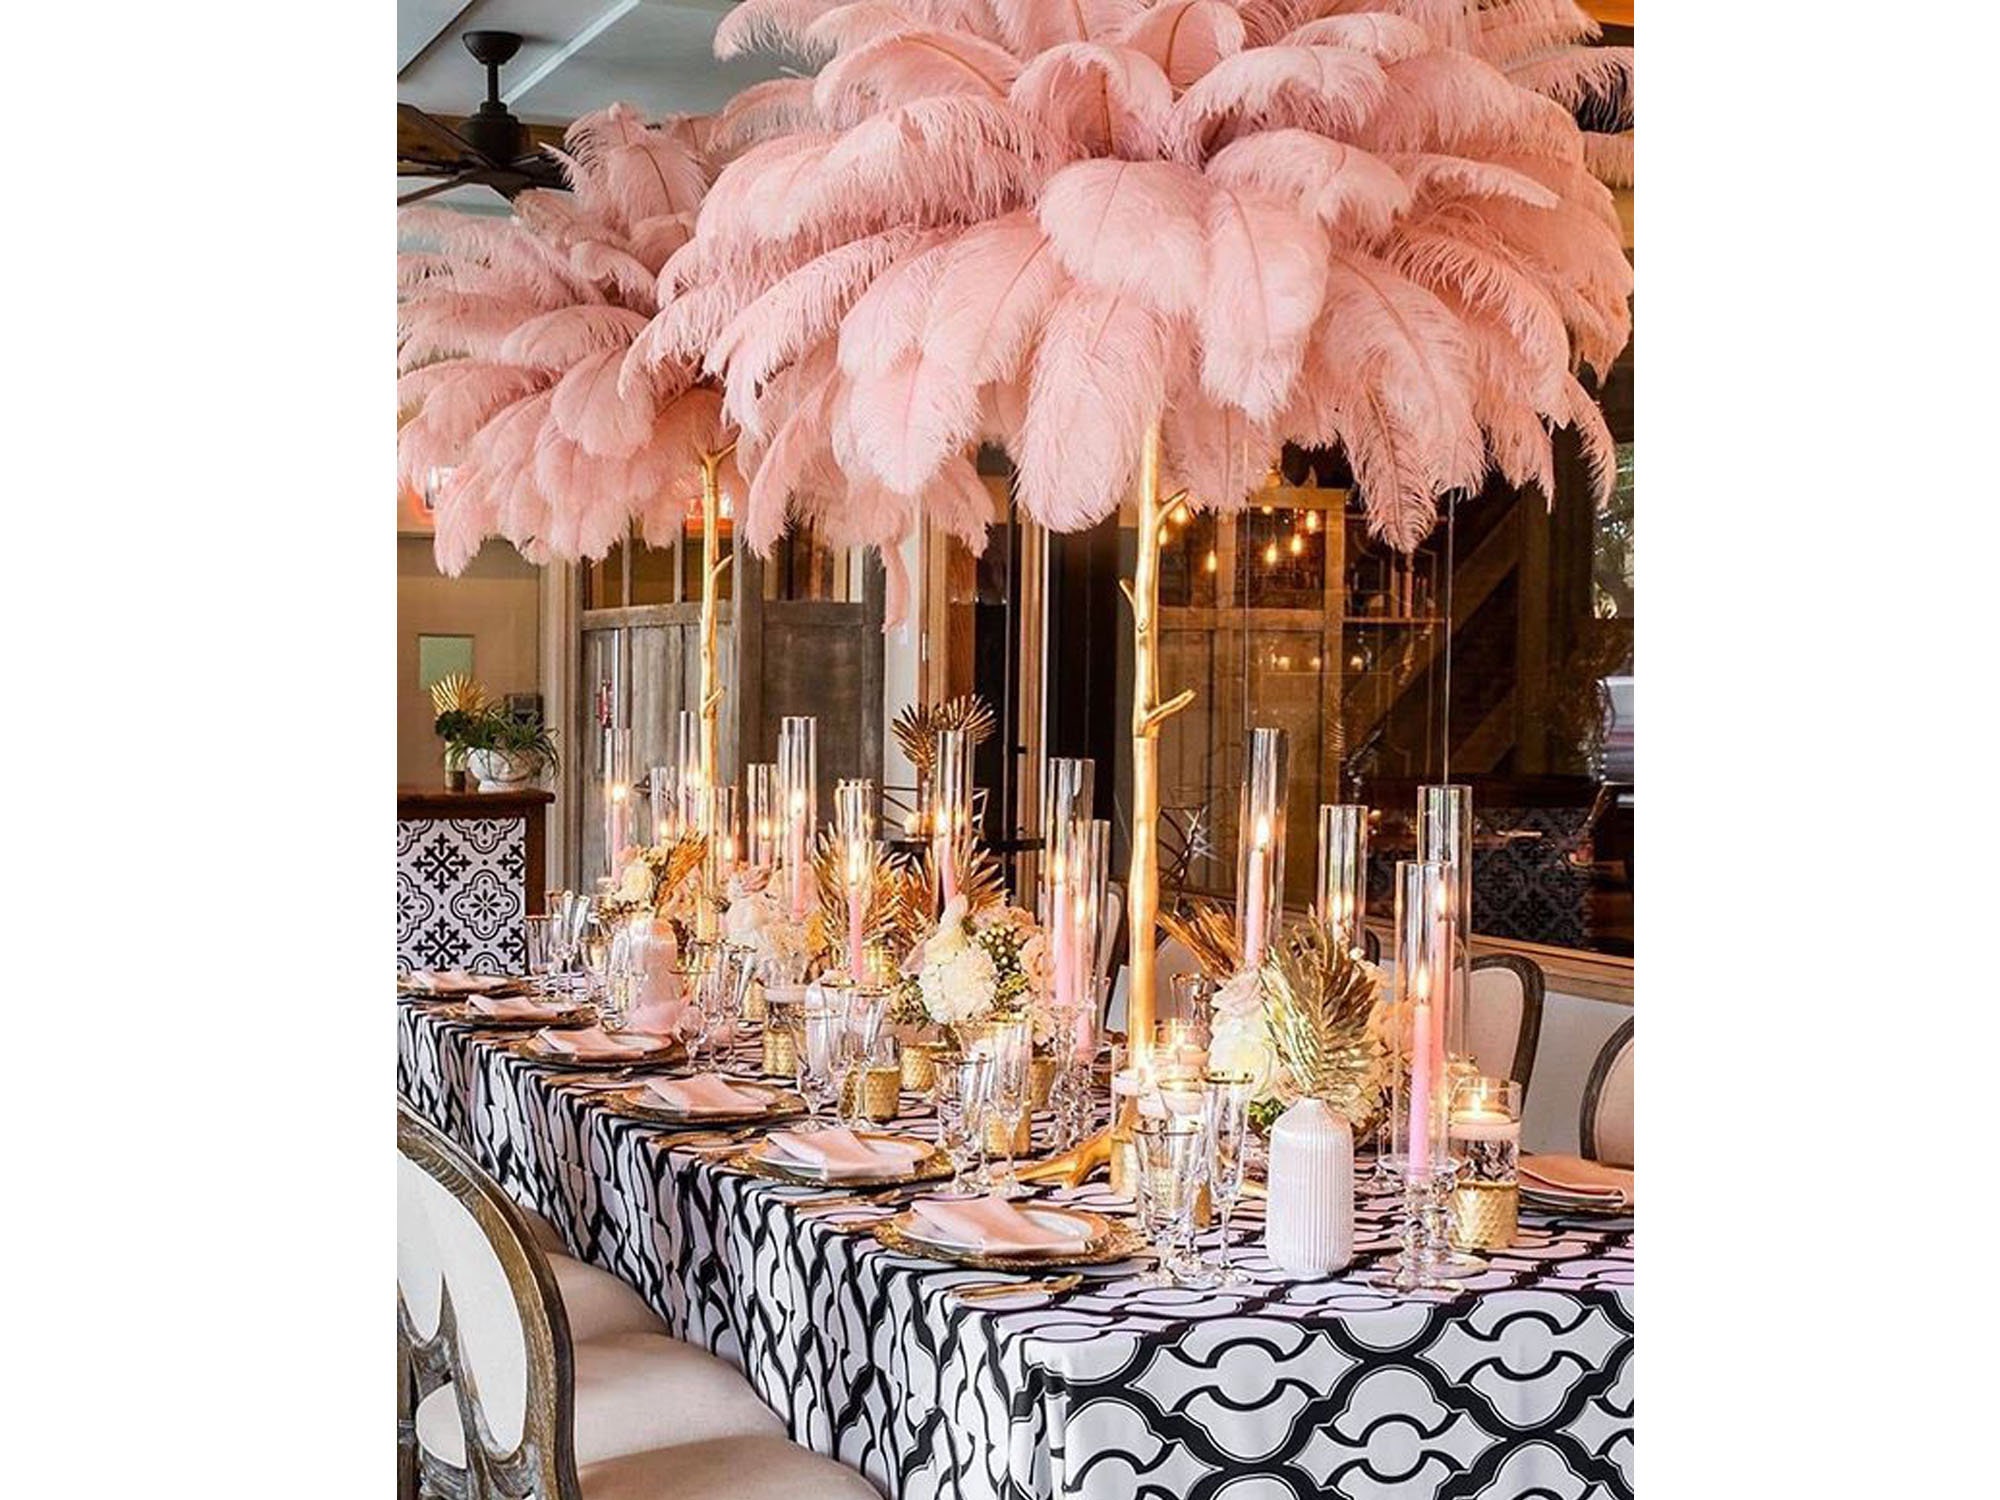 Rose Ostrich Feather Decor 15-70cm 6-28 Ostrich Feathers Crafts DIY Vases  Party Table Centerpieces Carnival Wedding Decoration